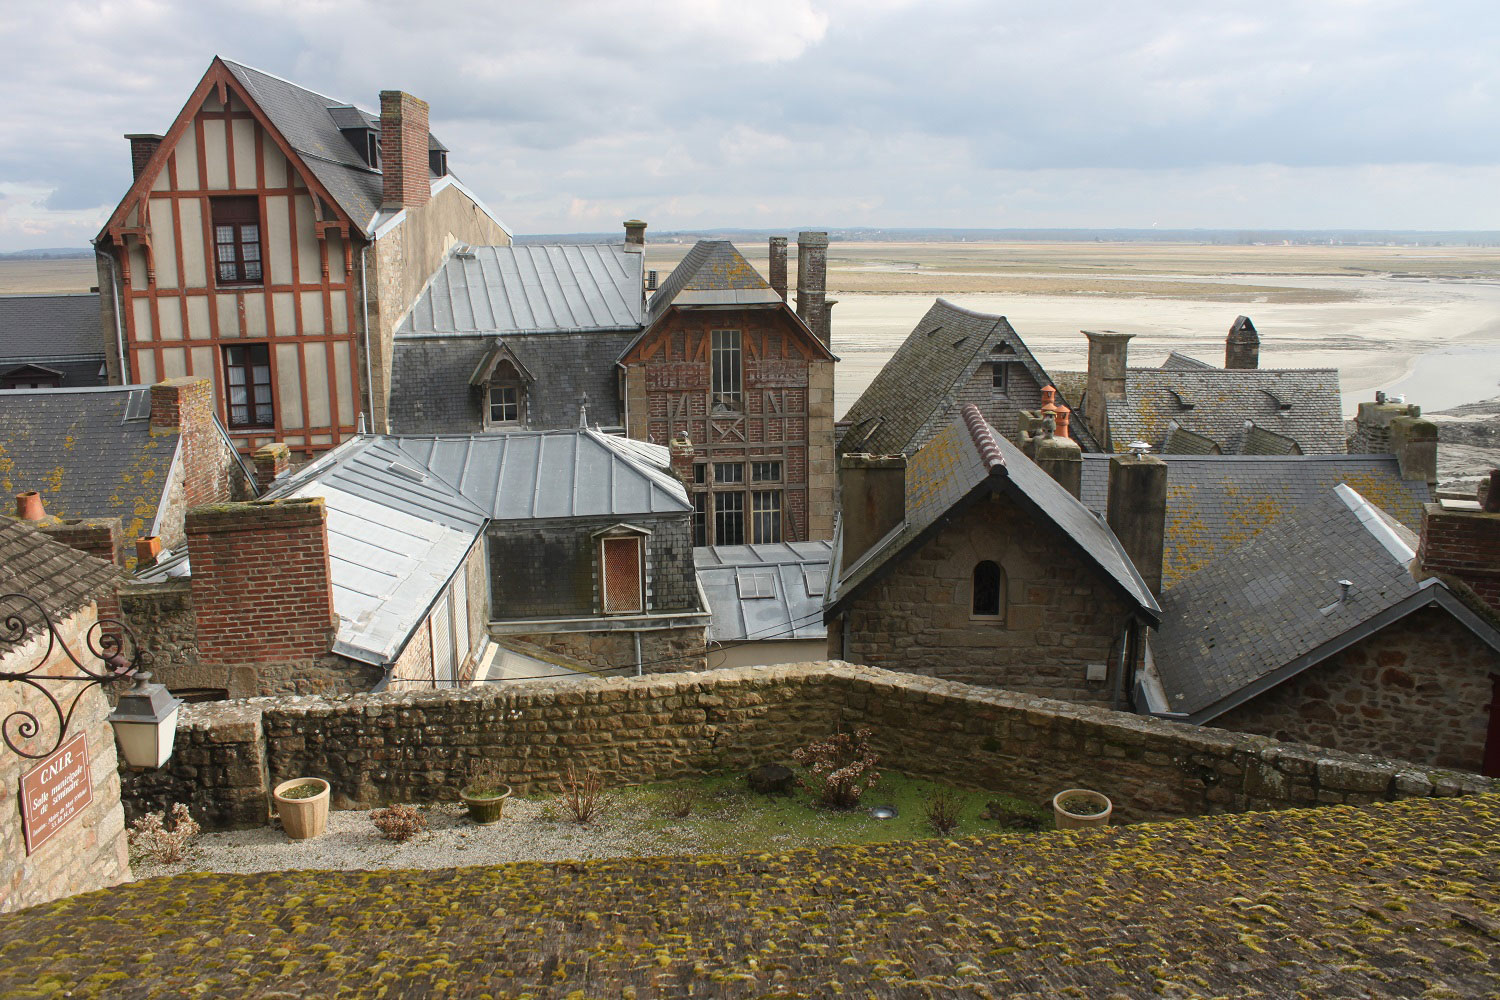 The medieval buildings of Mont St-Michel